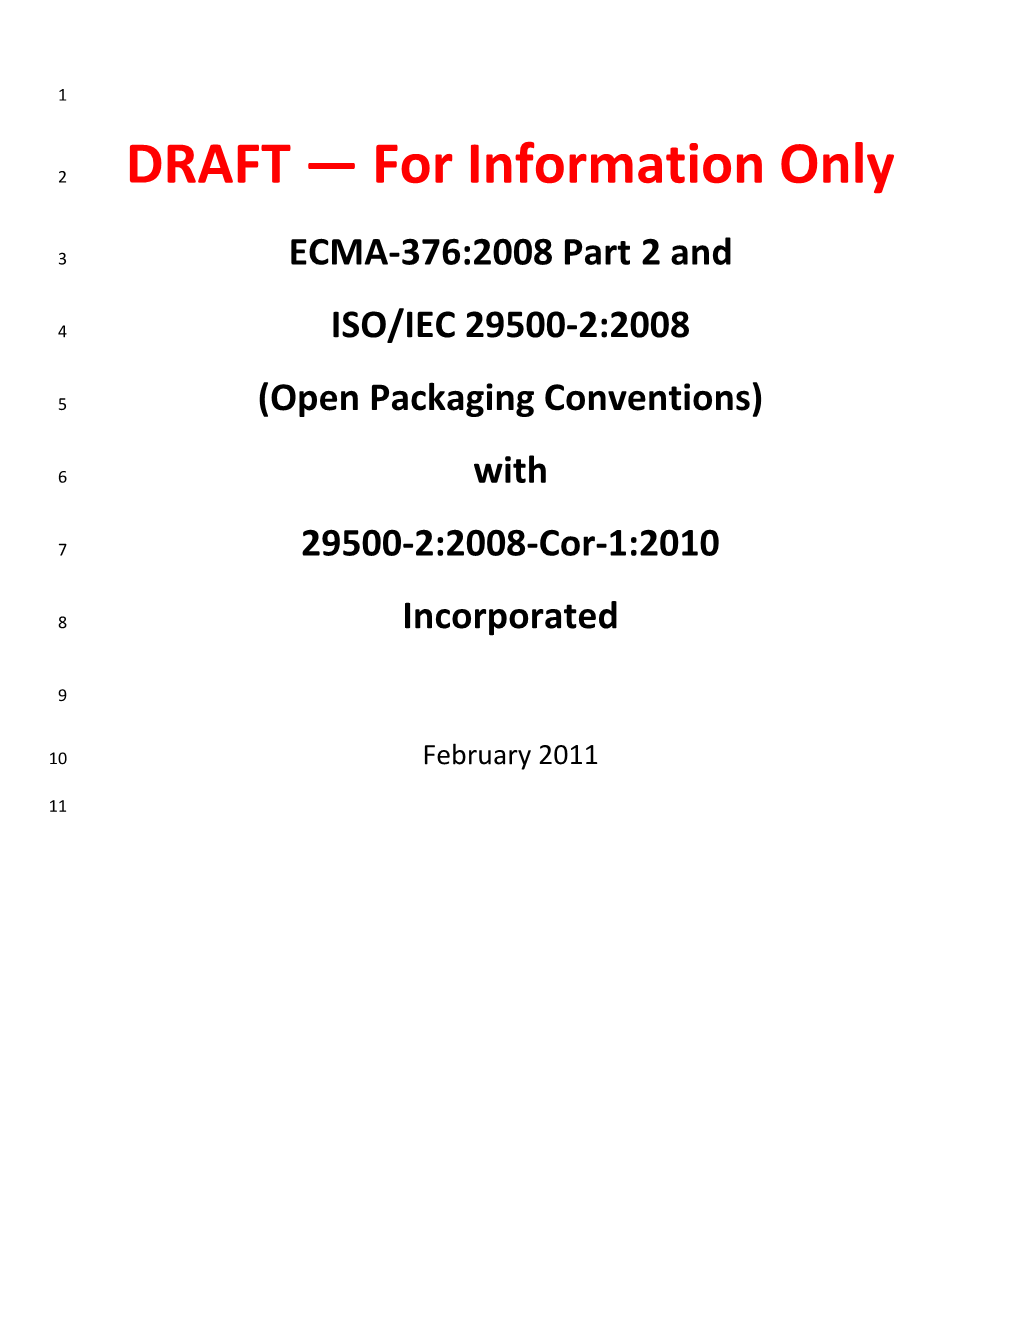 DRAFT for Information Only